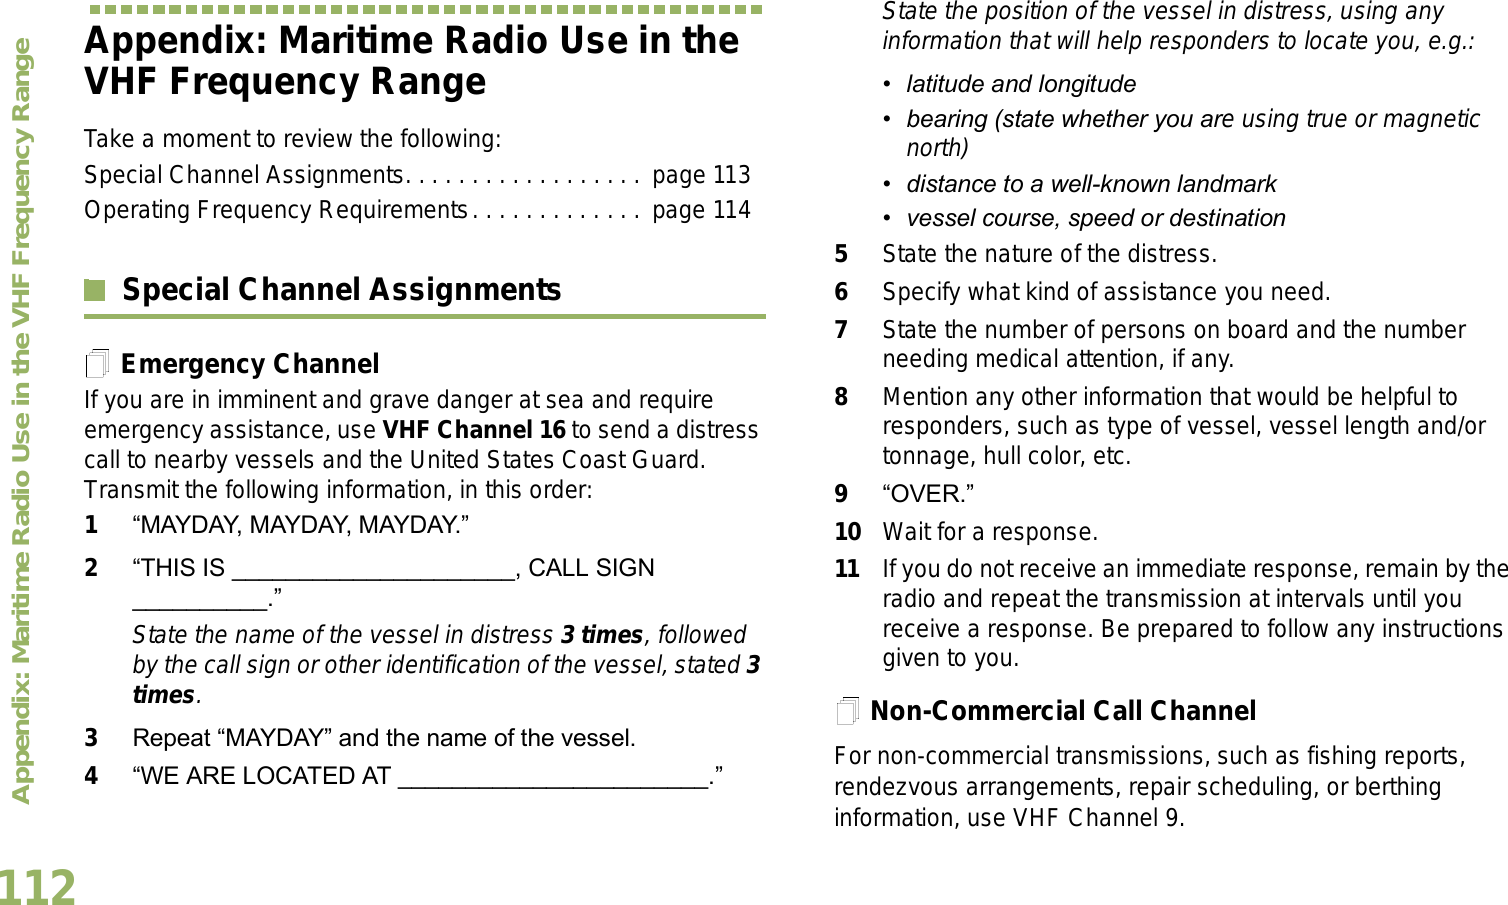 Appendix: Maritime Radio Use in the VHF Frequency RangeEnglish112Appendix: Maritime Radio Use in the VHF Frequency RangeTake a moment to review the following:Special Channel Assignments. . . . . . . . . . . . . . . . . .  page 113Operating Frequency Requirements. . . . . . . . . . . . . page 114Special Channel AssignmentsEmergency ChannelIf you are in imminent and grave danger at sea and require emergency assistance, use VHF Channel 16 to send a distress call to nearby vessels and the United States Coast Guard. Transmit the following information, in this order:1MAYDAY, MAYDAY, MAYDAY. 2THIS IS _____________________, CALL SIGN __________.State the name of the vessel in distress 3 times, followed by the call sign or other identification of the vessel, stated 3 times.3Repeat MAYDAY and the name of the vessel. 4WE ARE LOCATED AT _______________________.State the position of the vessel in distress, using any information that will help responders to locate you, e.g.:  latitude and longitude  bearing (state whether you are using true or magnetic north)  distance to a well-known landmark vessel course, speed or destination5State the nature of the distress. 6Specify what kind of assistance you need. 7State the number of persons on board and the number needing medical attention, if any.8Mention any other information that would be helpful to responders, such as type of vessel, vessel length and/or tonnage, hull color, etc.9OVER.10 Wait for a response. 11 If you do not receive an immediate response, remain by the radio and repeat the transmission at intervals until you receive a response. Be prepared to follow any instructions given to you.Non-Commercial Call ChannelFor non-commercial transmissions, such as fishing reports, rendezvous arrangements, repair scheduling, or berthing information, use VHF Channel 9.